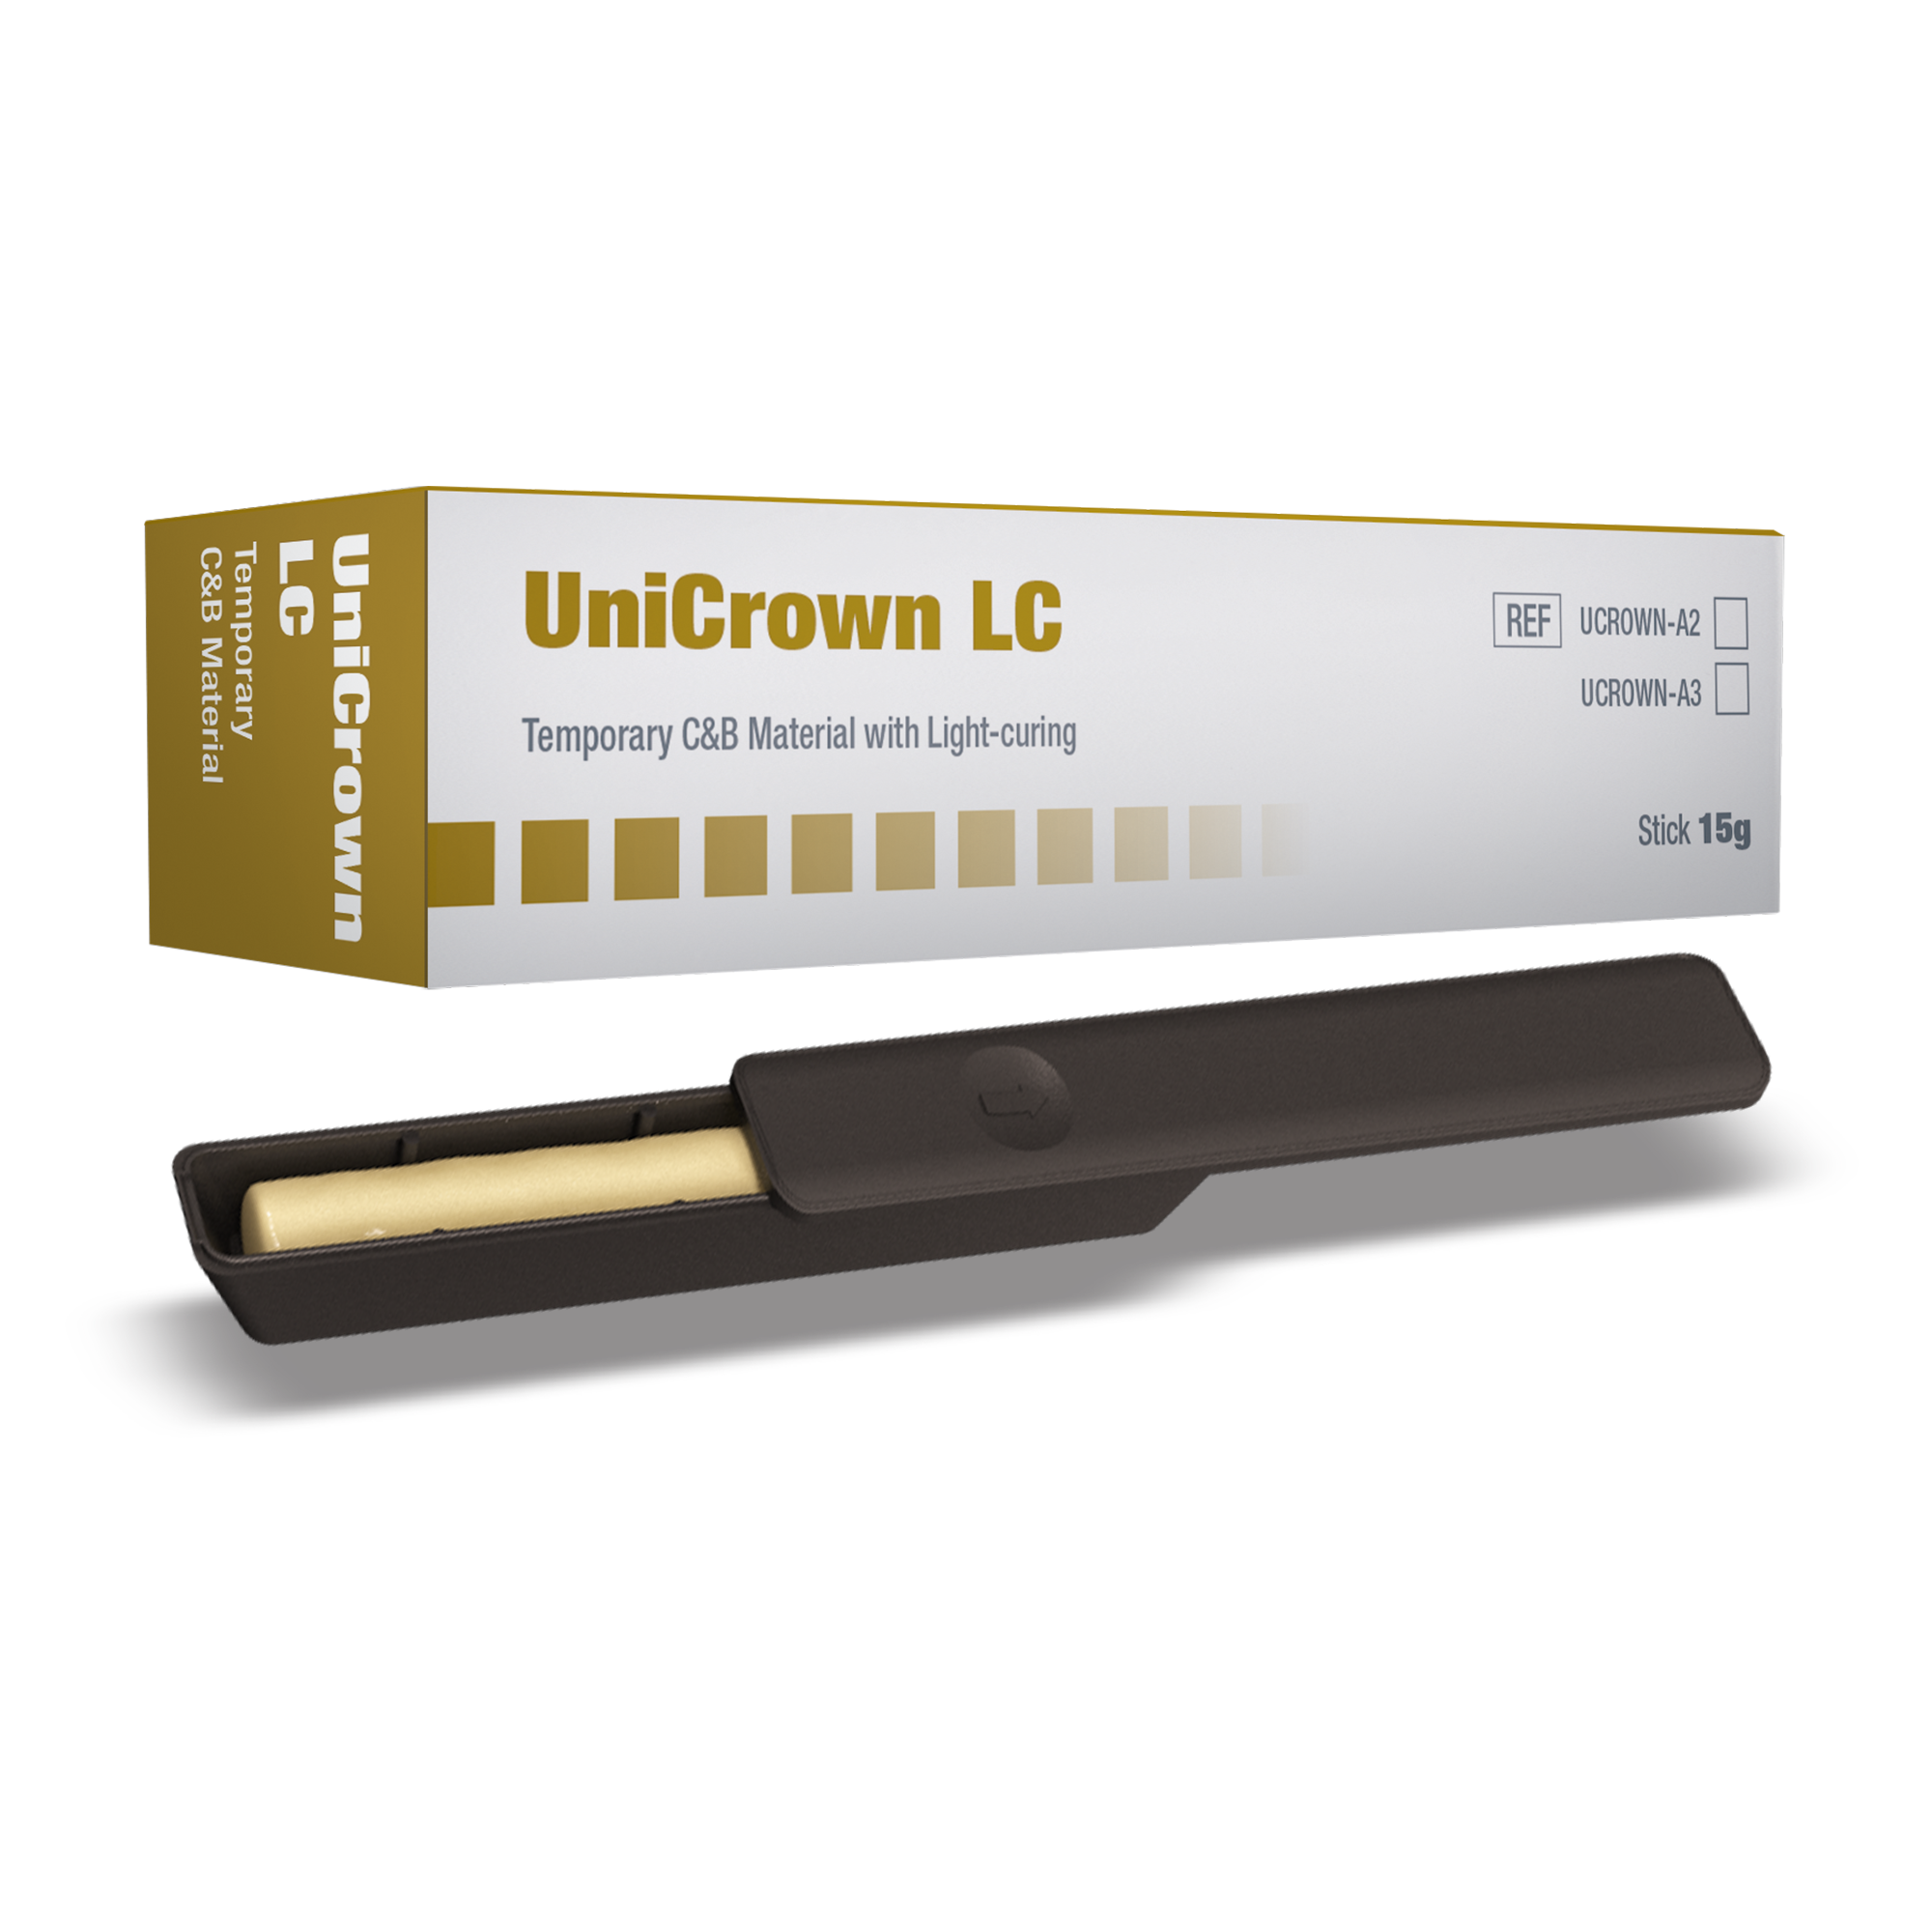 UniCrown LC Light Curing Temporary C&B Sculptable Crown Bridge Material